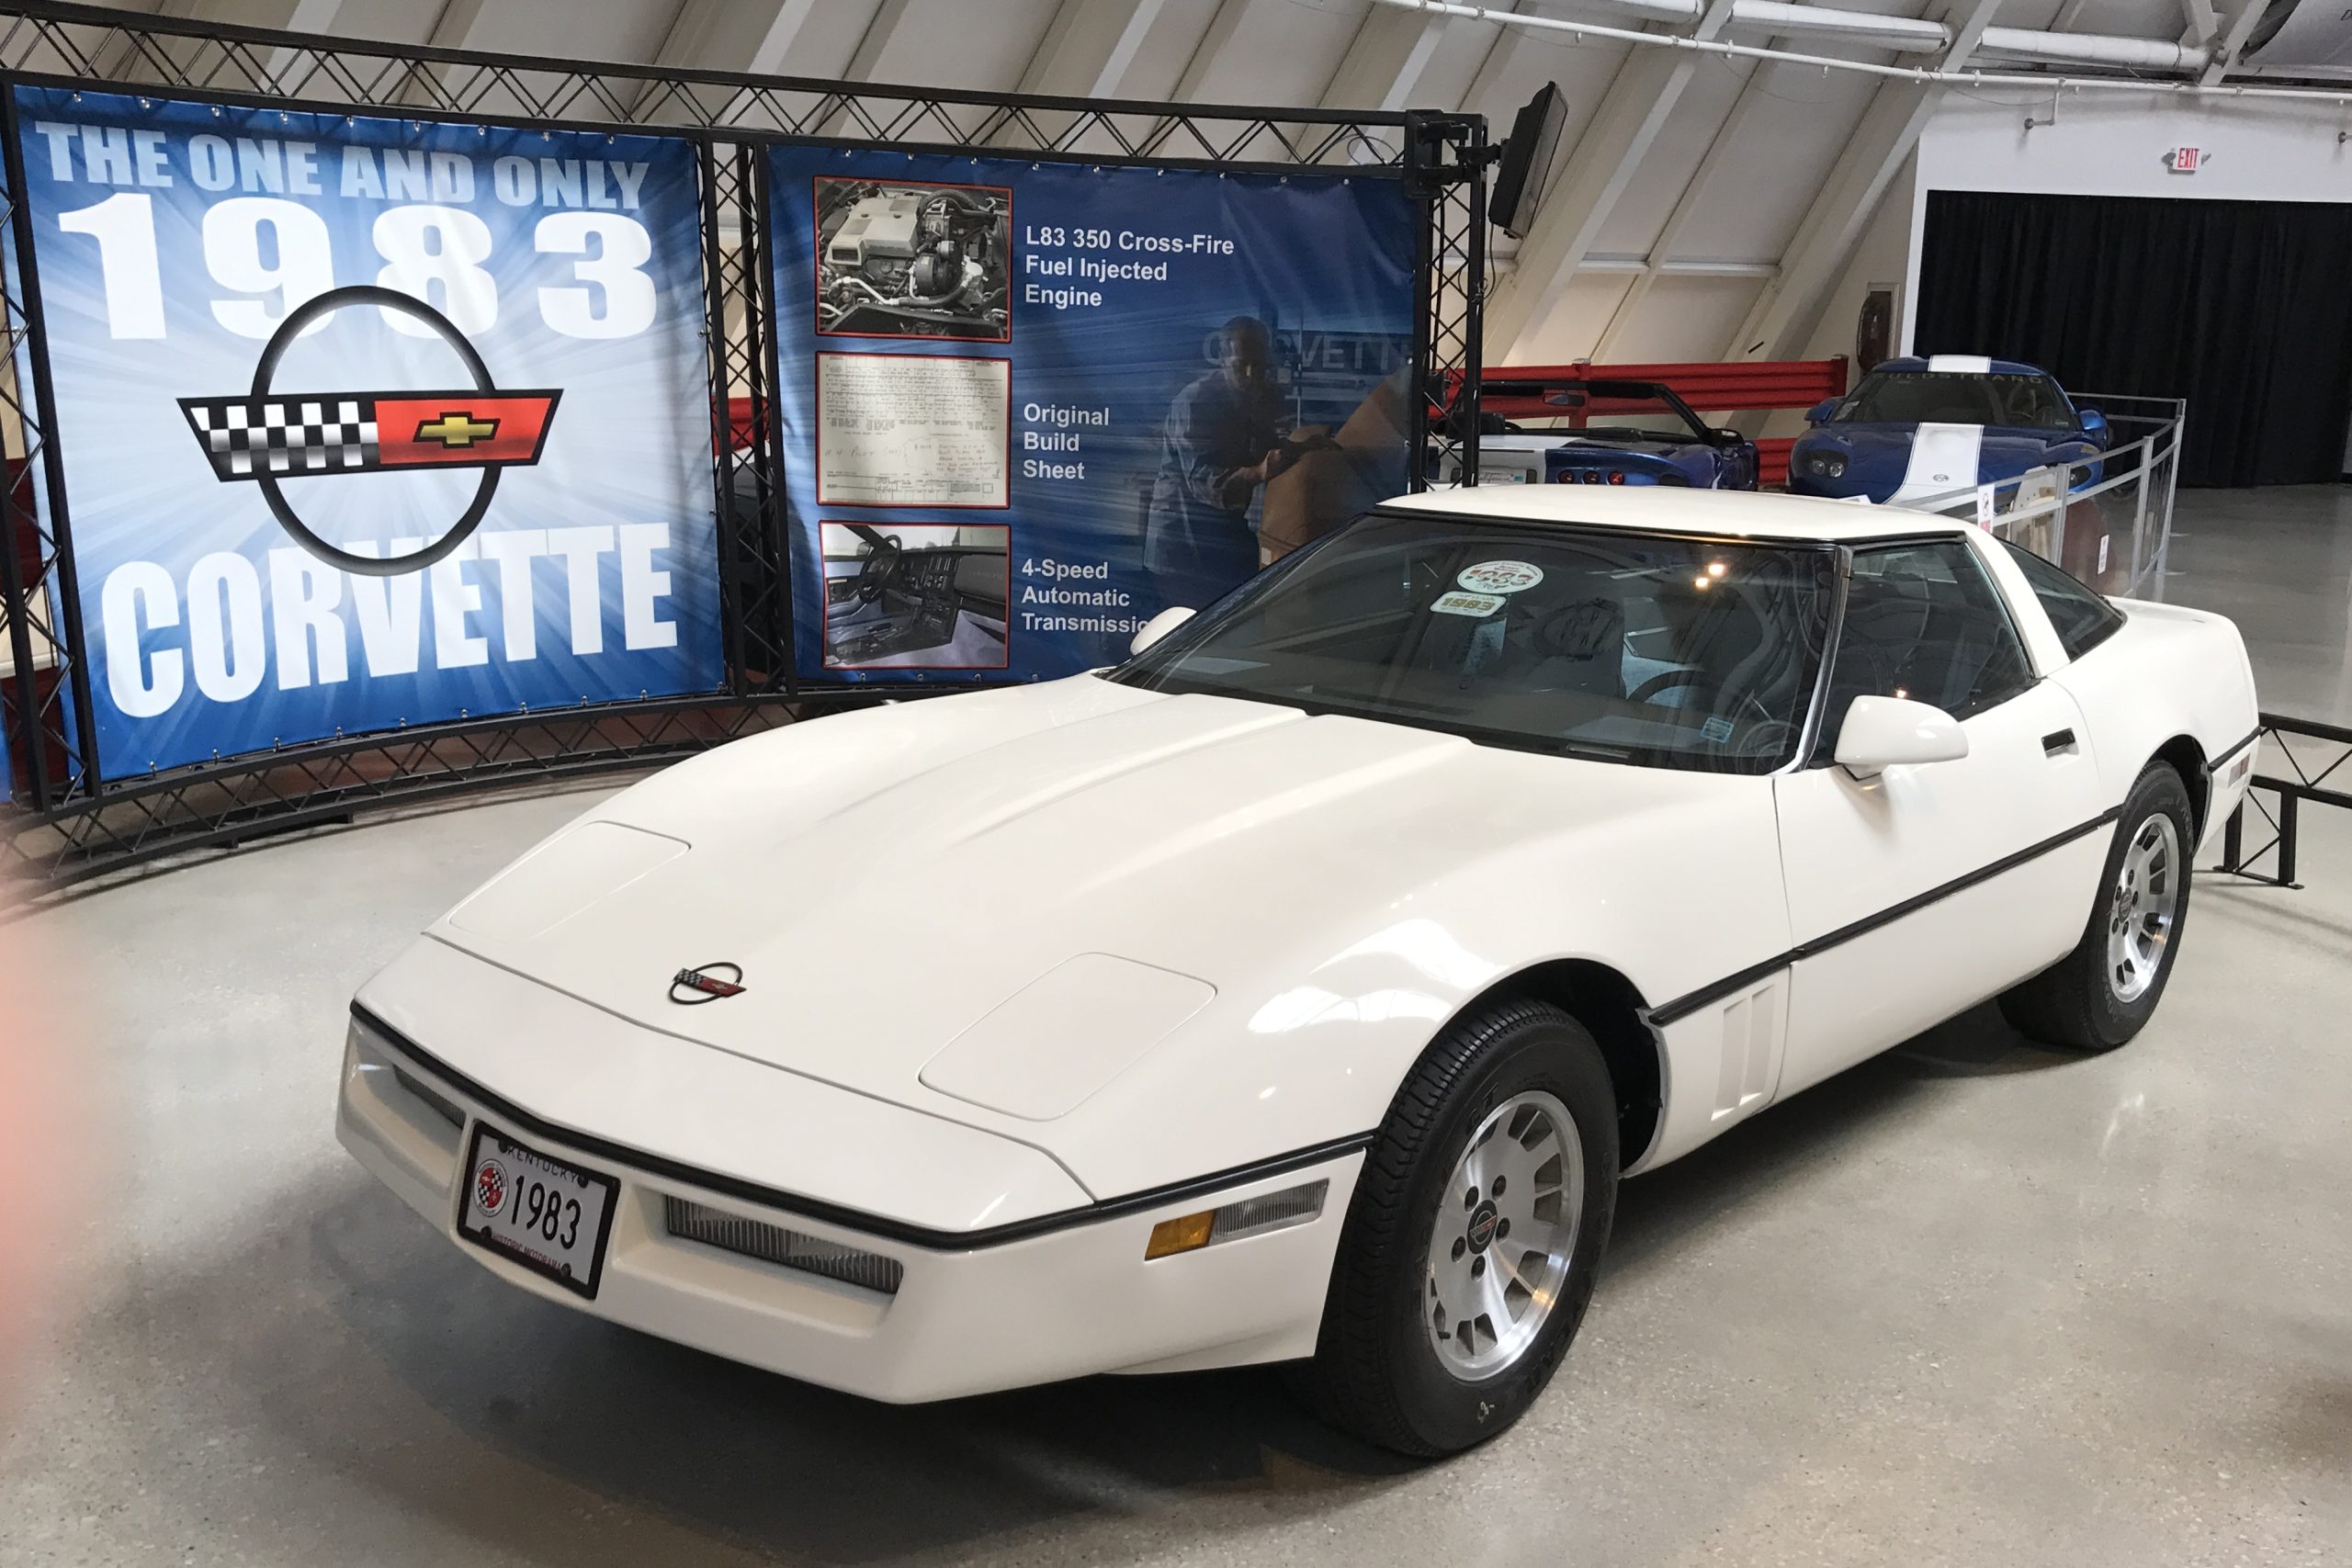 The 1983 Corvette - the One and Only